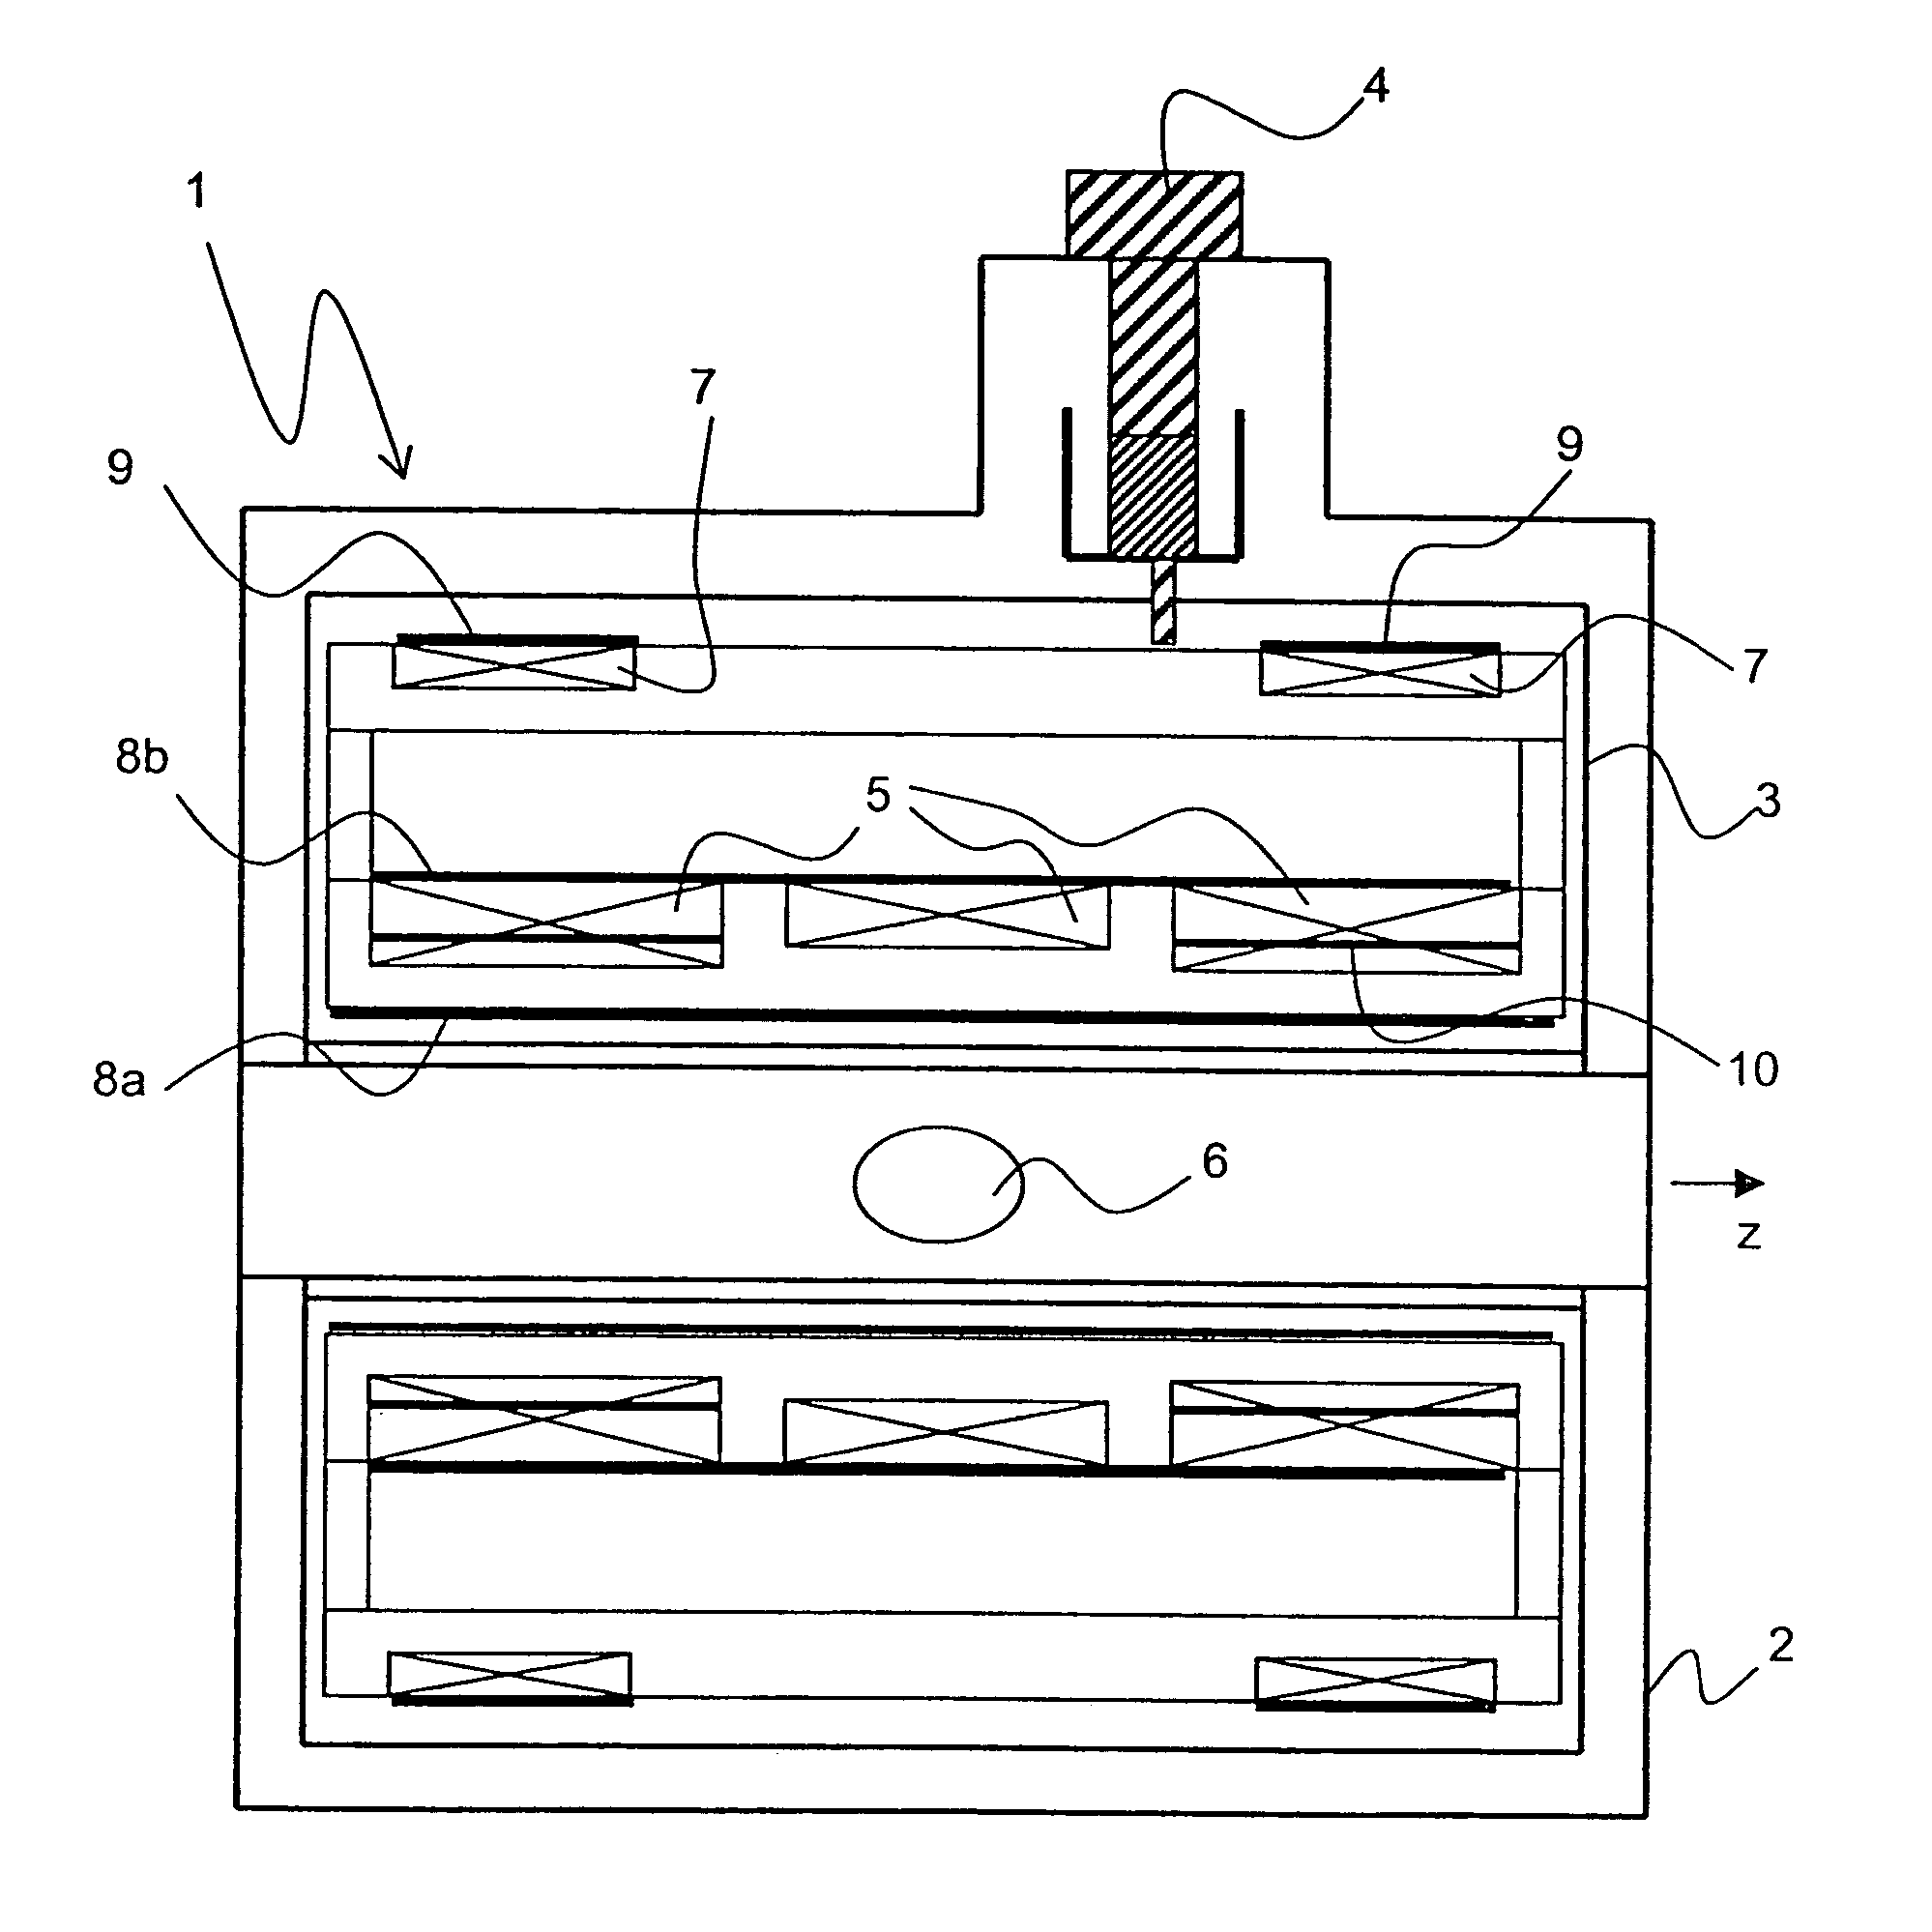 Additional fringe field shield for a superconducting magnet coil system